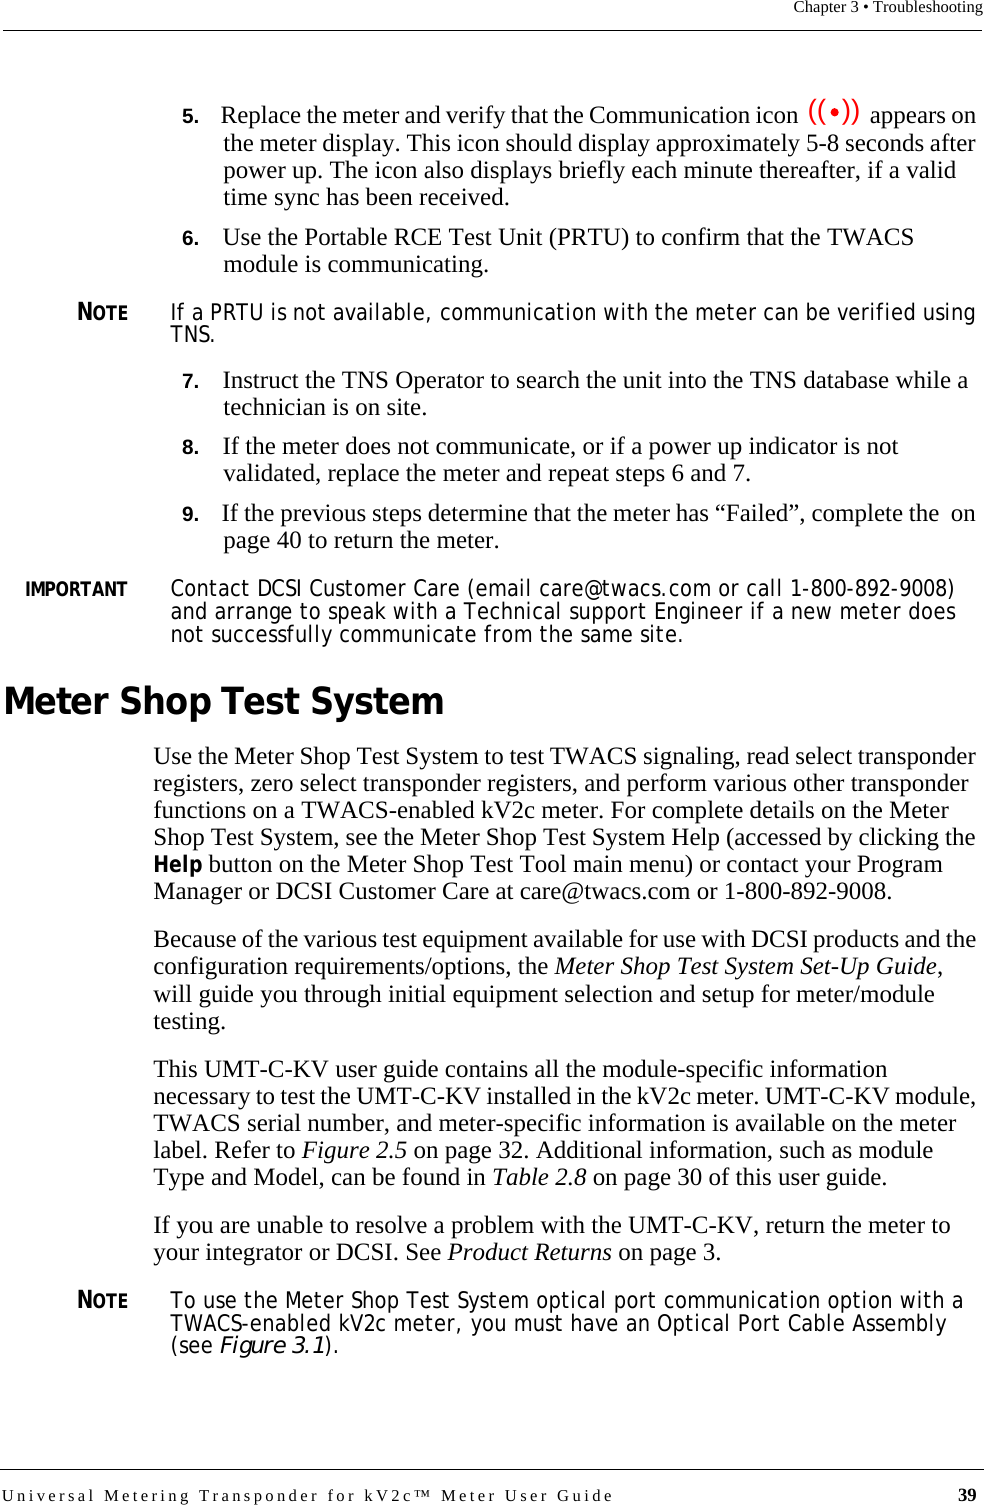 Universal Metering Transponder for kV2c™ Meter User Guide  39Chapter 3 • Troubleshooting5.   Replace the meter and verify that the Communication icon   appears on the meter display. This icon should display approximately 5-8 seconds after power up. The icon also displays briefly each minute thereafter, if a valid time sync has been received.6.   Use the Portable RCE Test Unit (PRTU) to confirm that the TWACS module is communicating. NOTEIf a PRTU is not available, communication with the meter can be verified using TNS. 7.   Instruct the TNS Operator to search the unit into the TNS database while a technician is on site.8.   If the meter does not communicate, or if a power up indicator is not validated, replace the meter and repeat steps 6 and 7.9.   If the previous steps determine that the meter has “Failed”, complete the  on page 40 to return the meter.IMPORTANTContact DCSI Customer Care (email care@twacs.com or call 1-800-892-9008) and arrange to speak with a Technical support Engineer if a new meter does not successfully communicate from the same site.Meter Shop Test SystemUse the Meter Shop Test System to test TWACS signaling, read select transponder registers, zero select transponder registers, and perform various other transponder functions on a TWACS-enabled kV2c meter. For complete details on the Meter Shop Test System, see the Meter Shop Test System Help (accessed by clicking the Help button on the Meter Shop Test Tool main menu) or contact your Program Manager or DCSI Customer Care at care@twacs.com or 1-800-892-9008.Because of the various test equipment available for use with DCSI products and the configuration requirements/options, the Meter Shop Test System Set-Up Guide, will guide you through initial equipment selection and setup for meter/module testing. This UMT-C-KV user guide contains all the module-specific information necessary to test the UMT-C-KV installed in the kV2c meter. UMT-C-KV module, TWACS serial number, and meter-specific information is available on the meter label. Refer to Figure 2.5 on page 32. Additional information, such as module Type and Model, can be found in Table 2.8 on page 30 of this user guide.If you are unable to resolve a problem with the UMT-C-KV, return the meter to your integrator or DCSI. See Product Returns on page 3.NOTETo use the Meter Shop Test System optical port communication option with a TWACS-enabled kV2c meter, you must have an Optical Port Cable Assembly (see Figure 3.1).((  ))